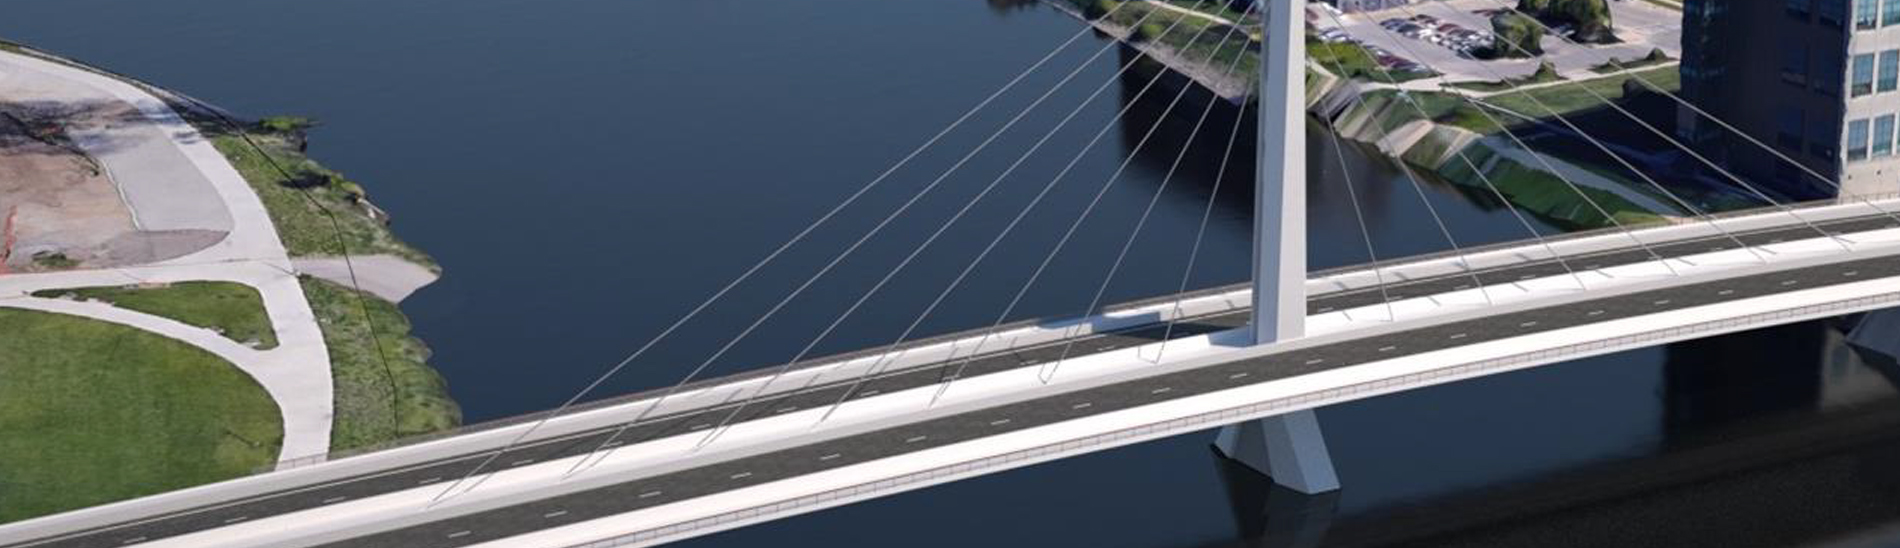 Rendering of a cable-stayed bridge over a body of water.